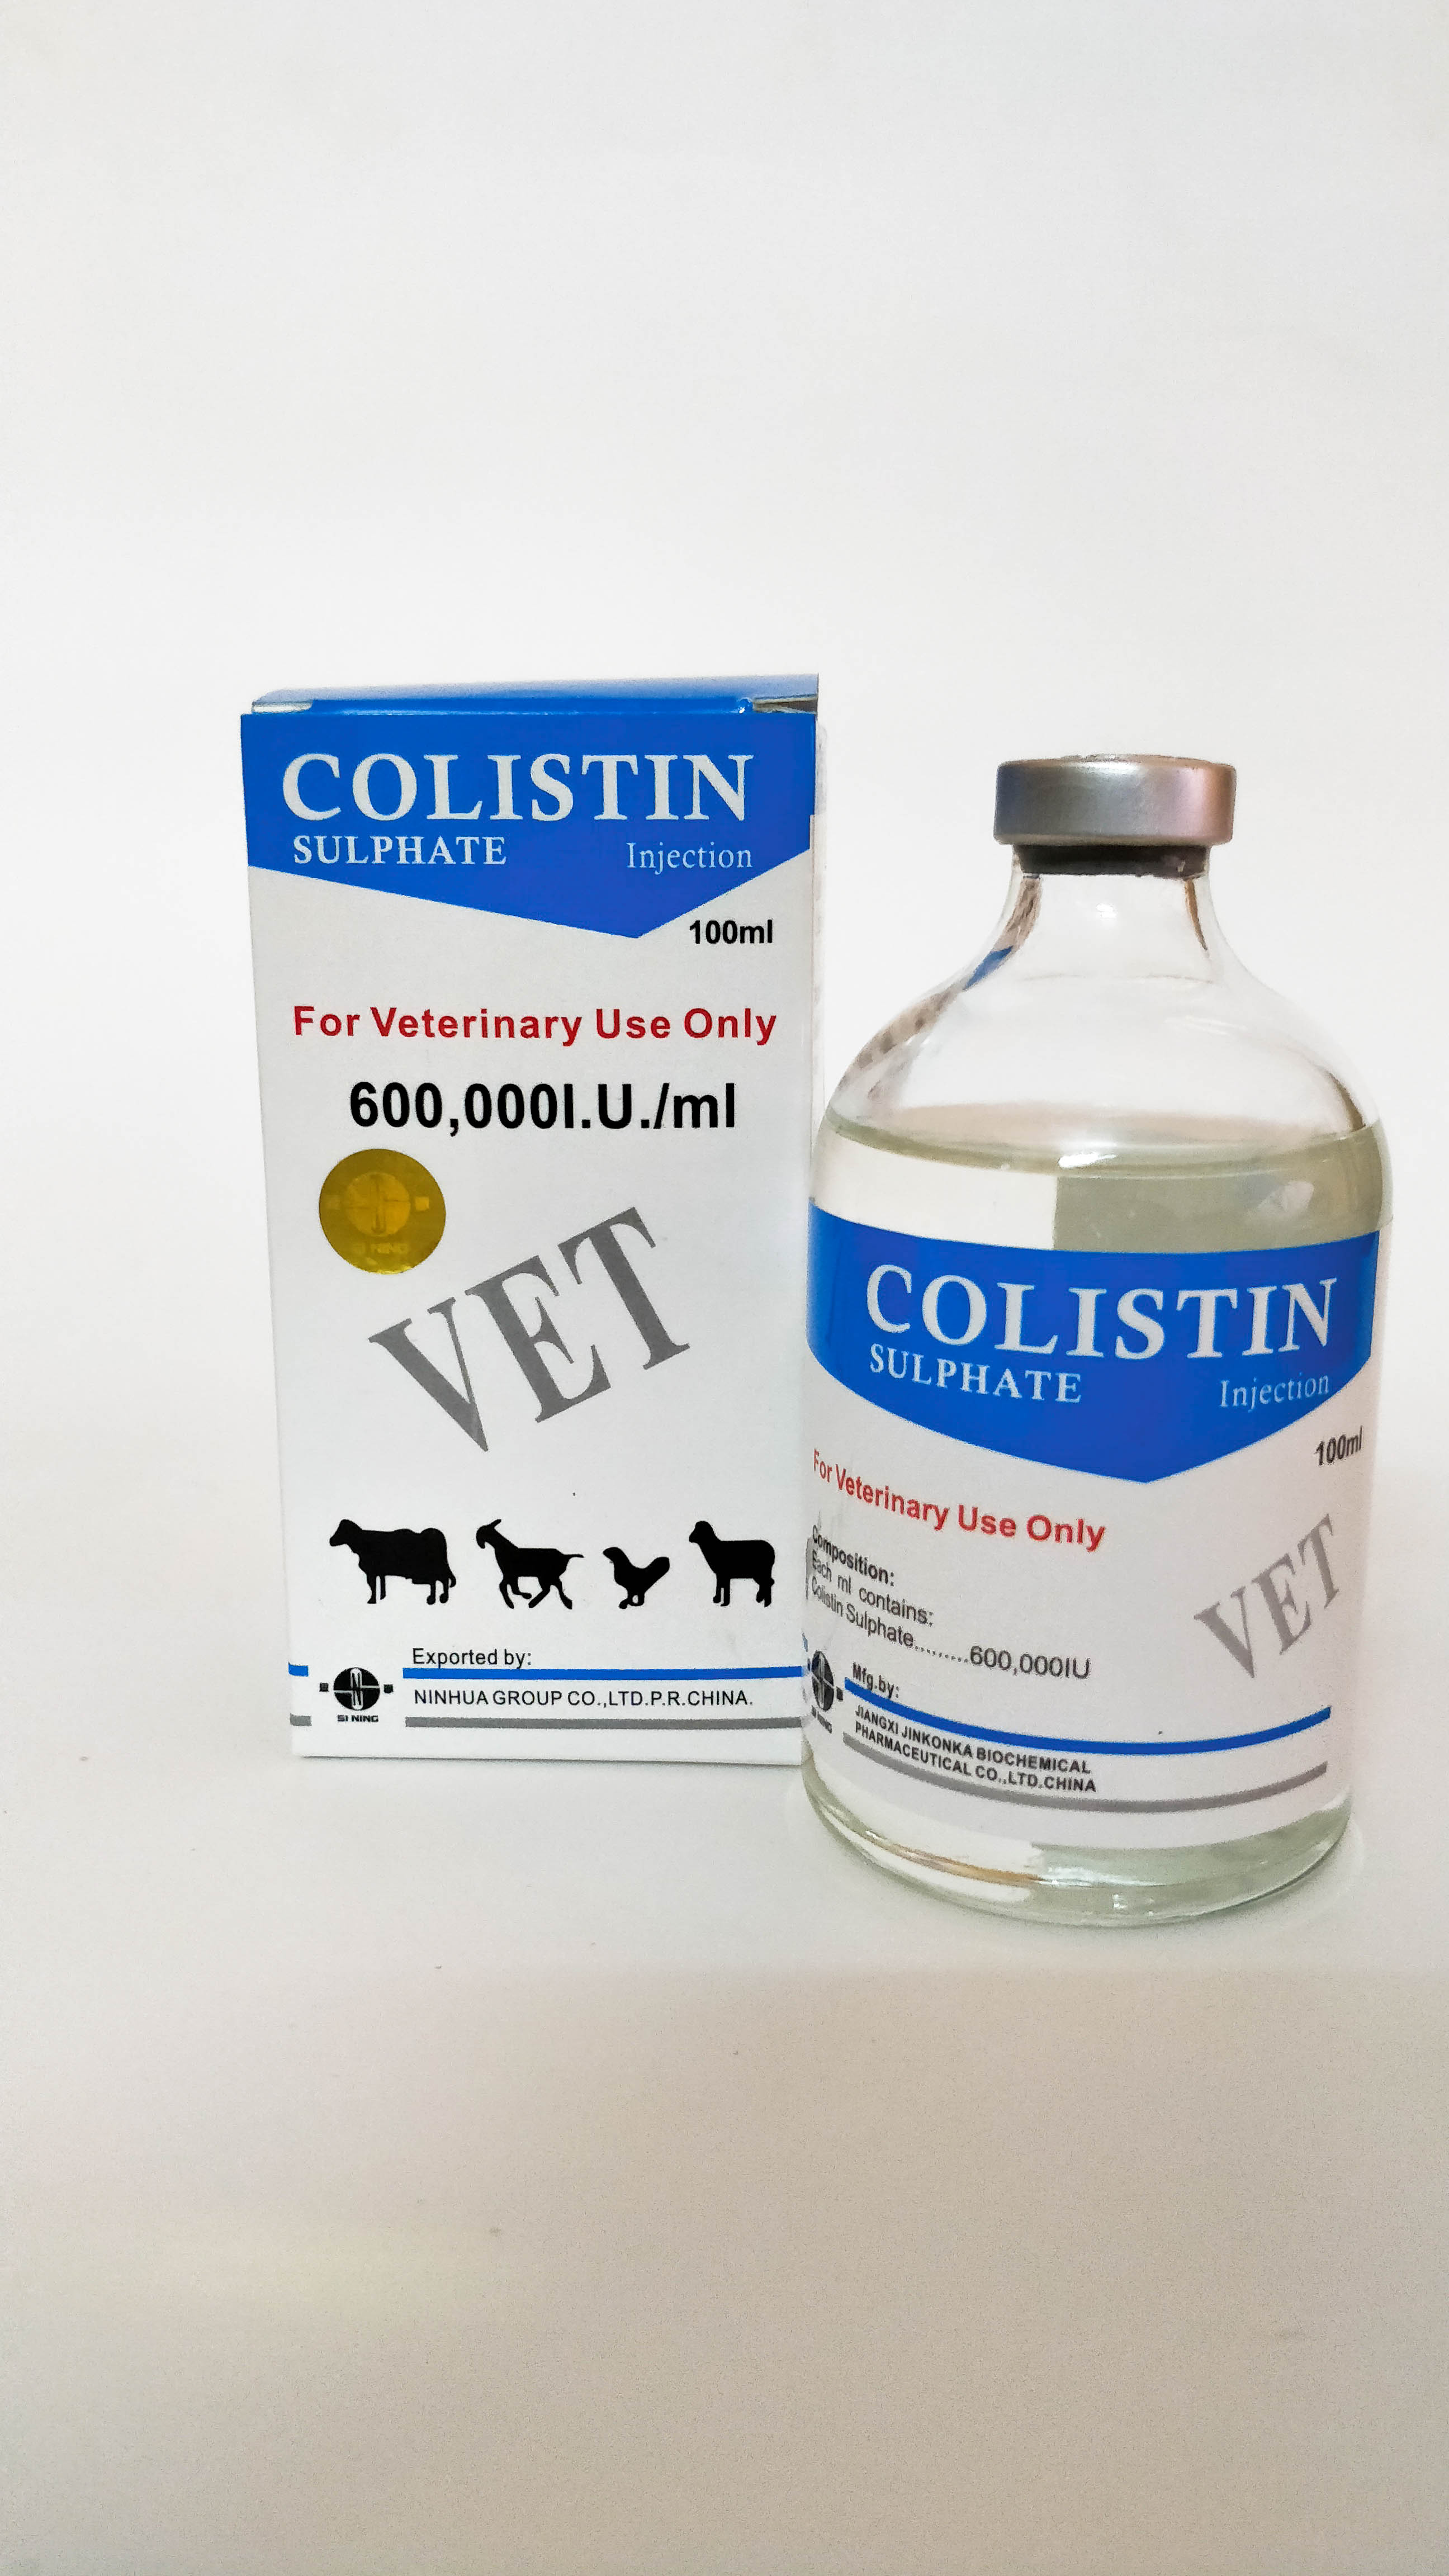 Colistin Sulphate Injection 100ml